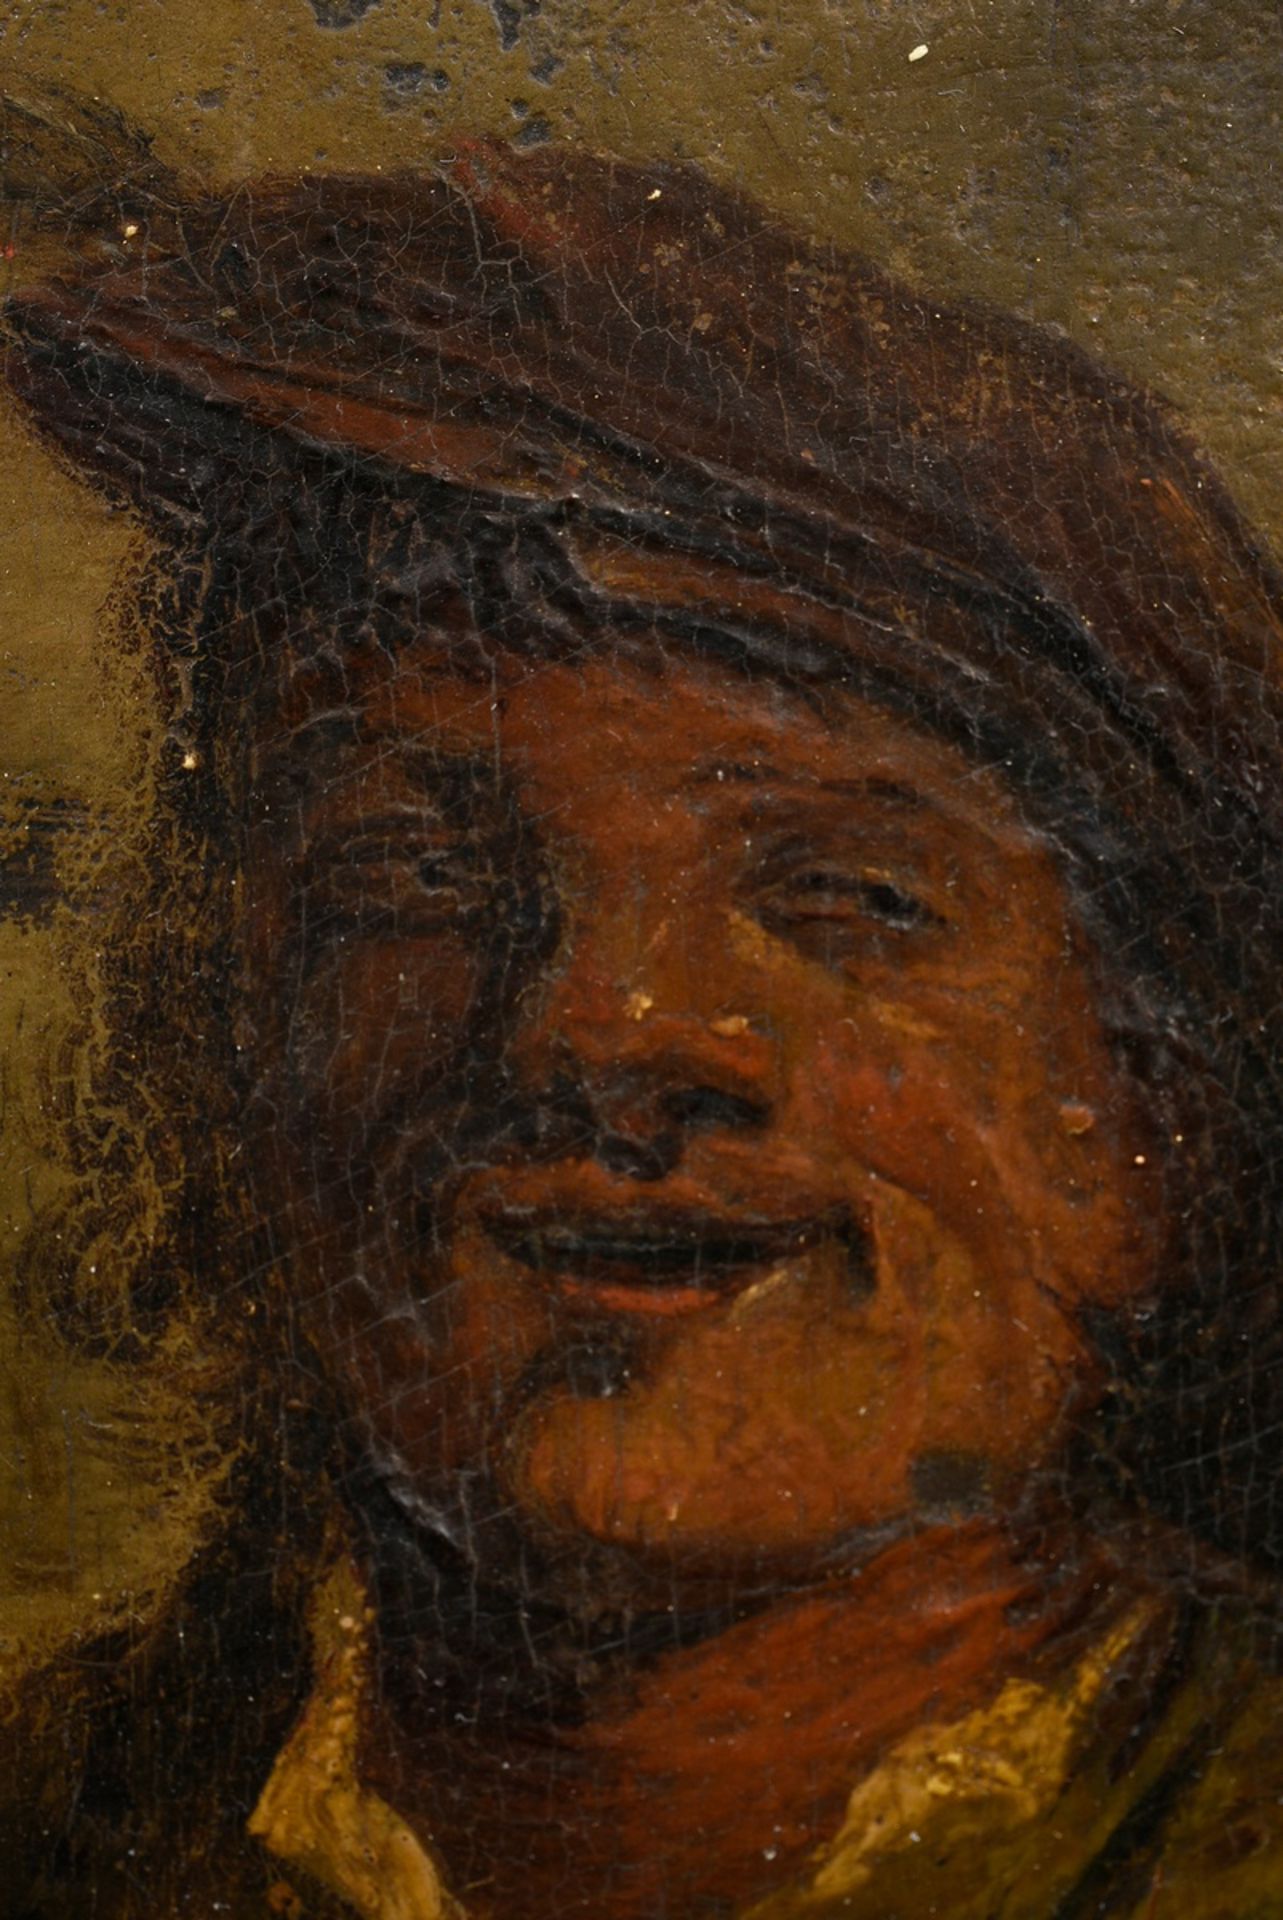 Unknown artist of the 17th/18th c. "Wine Drinker", in the style of Frans Hals (1585-1666), oil/wood - Image 3 of 7